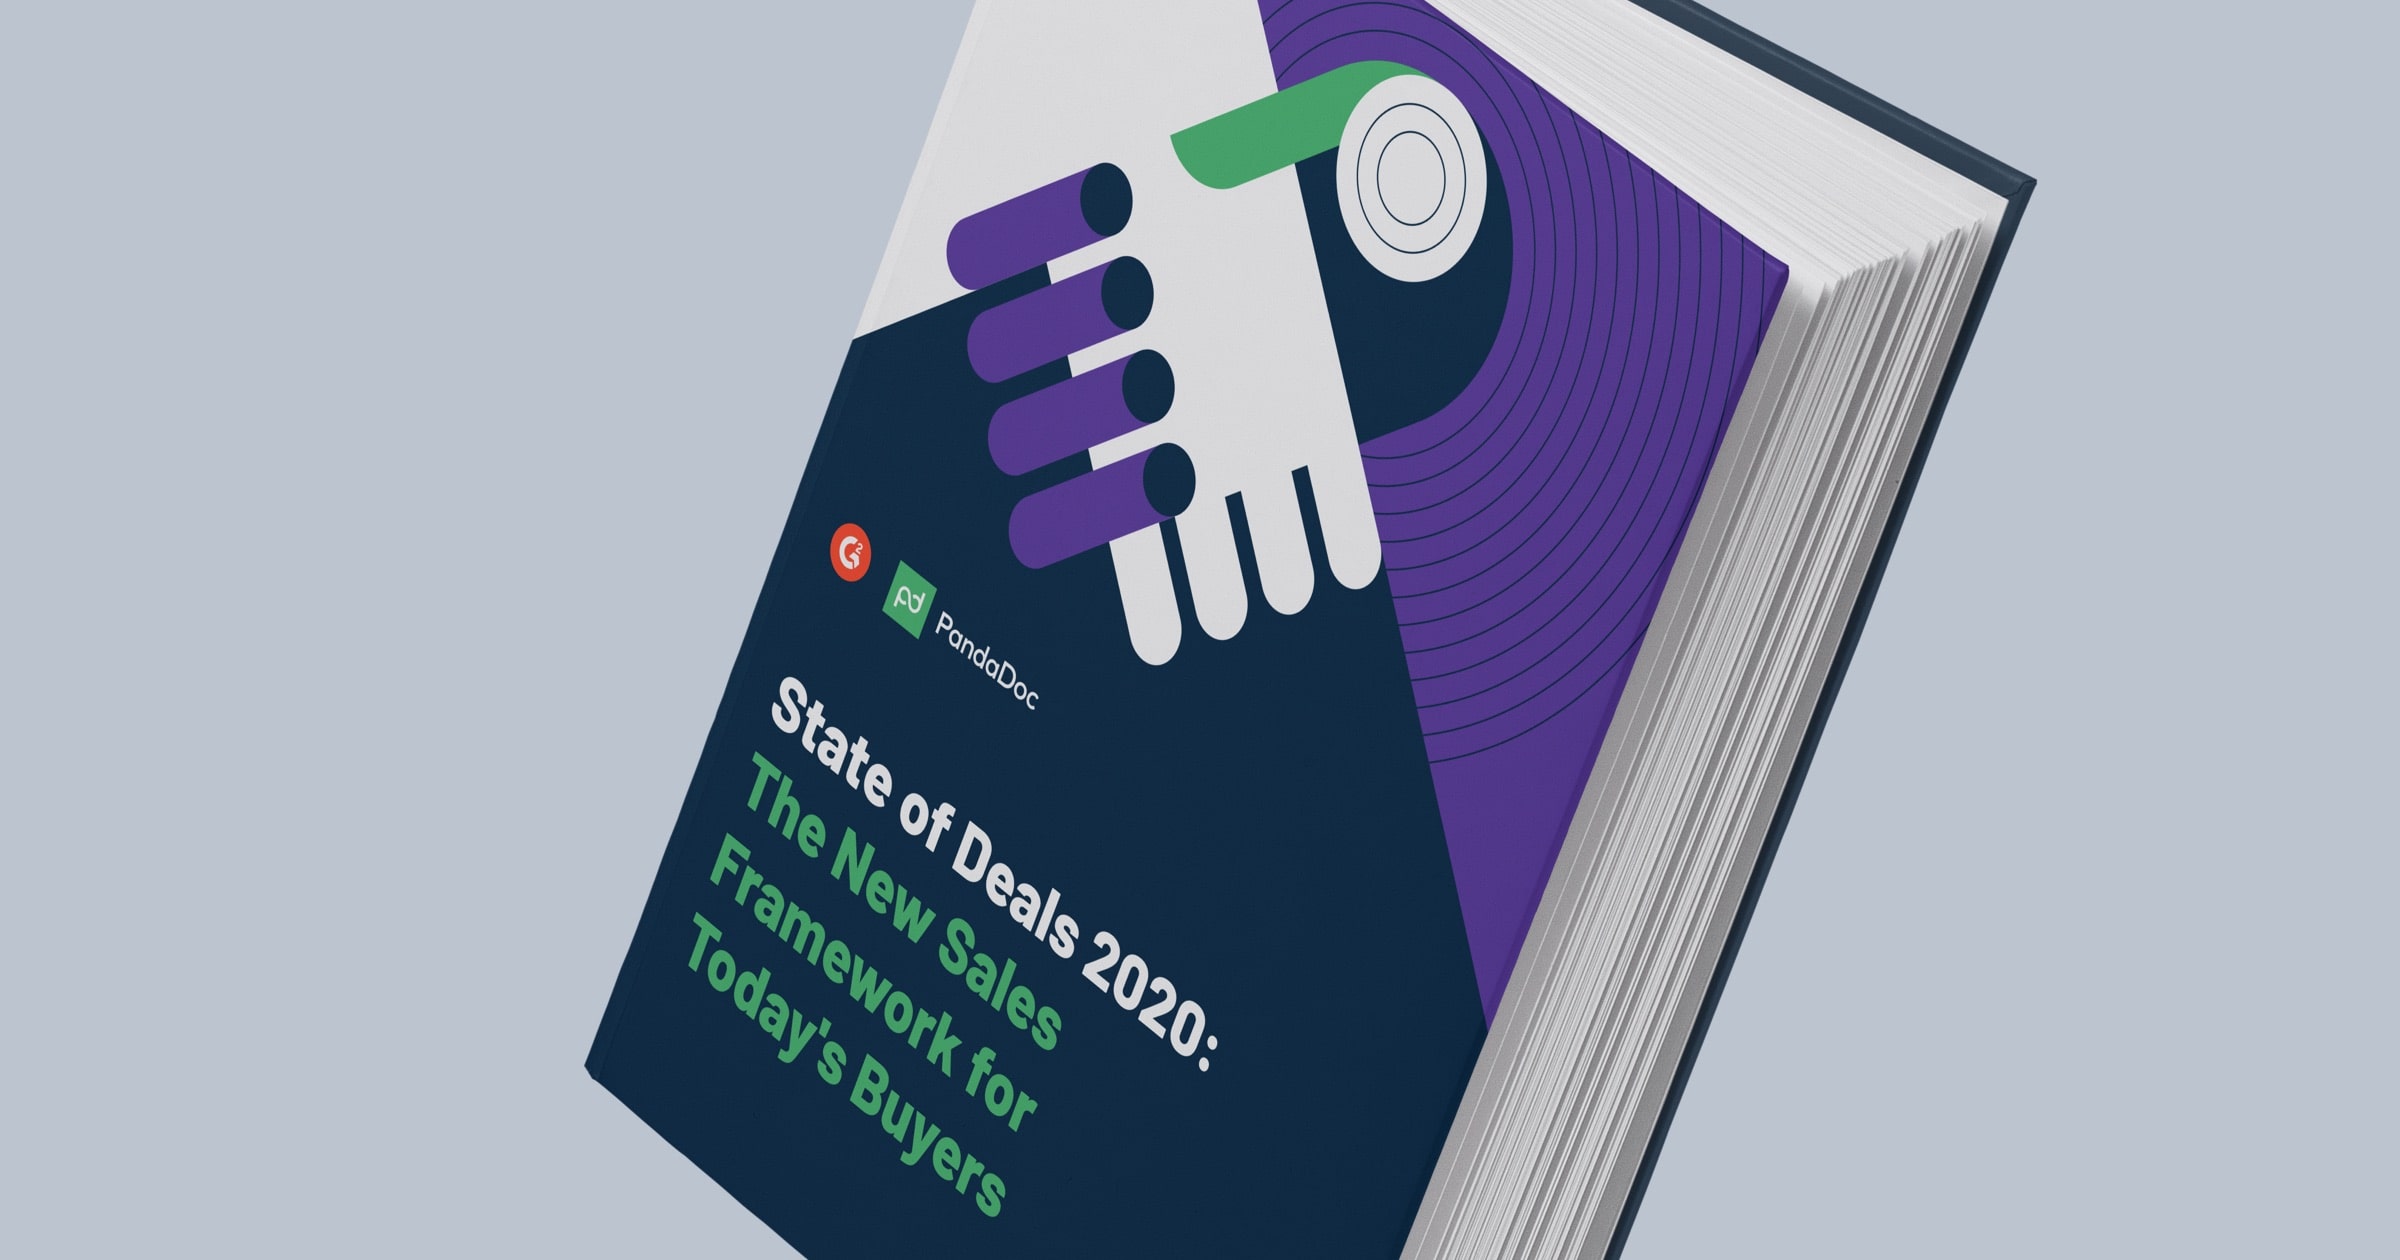 PandaDoc & G2 proudly present:  State of deals 2020: the new sales framework for today’s buyers